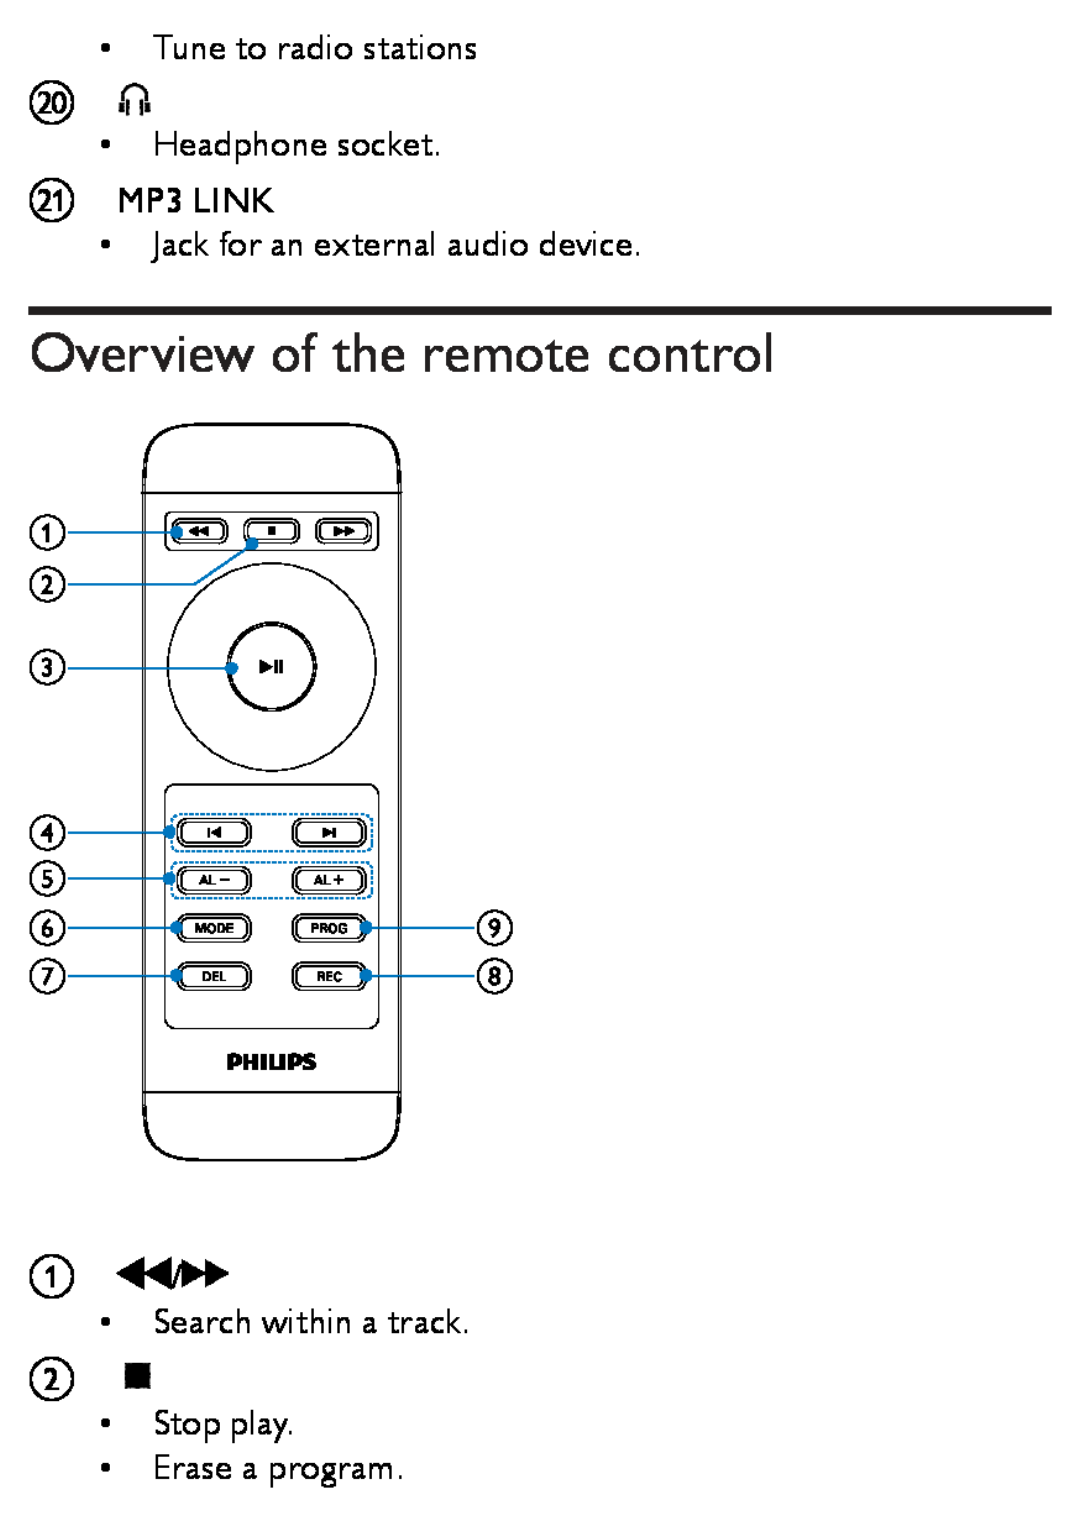 Philips AZ1852 Overview of the remote control, Tune to radio stations, Headphone socket UMP3 LINK, A Search within a track 